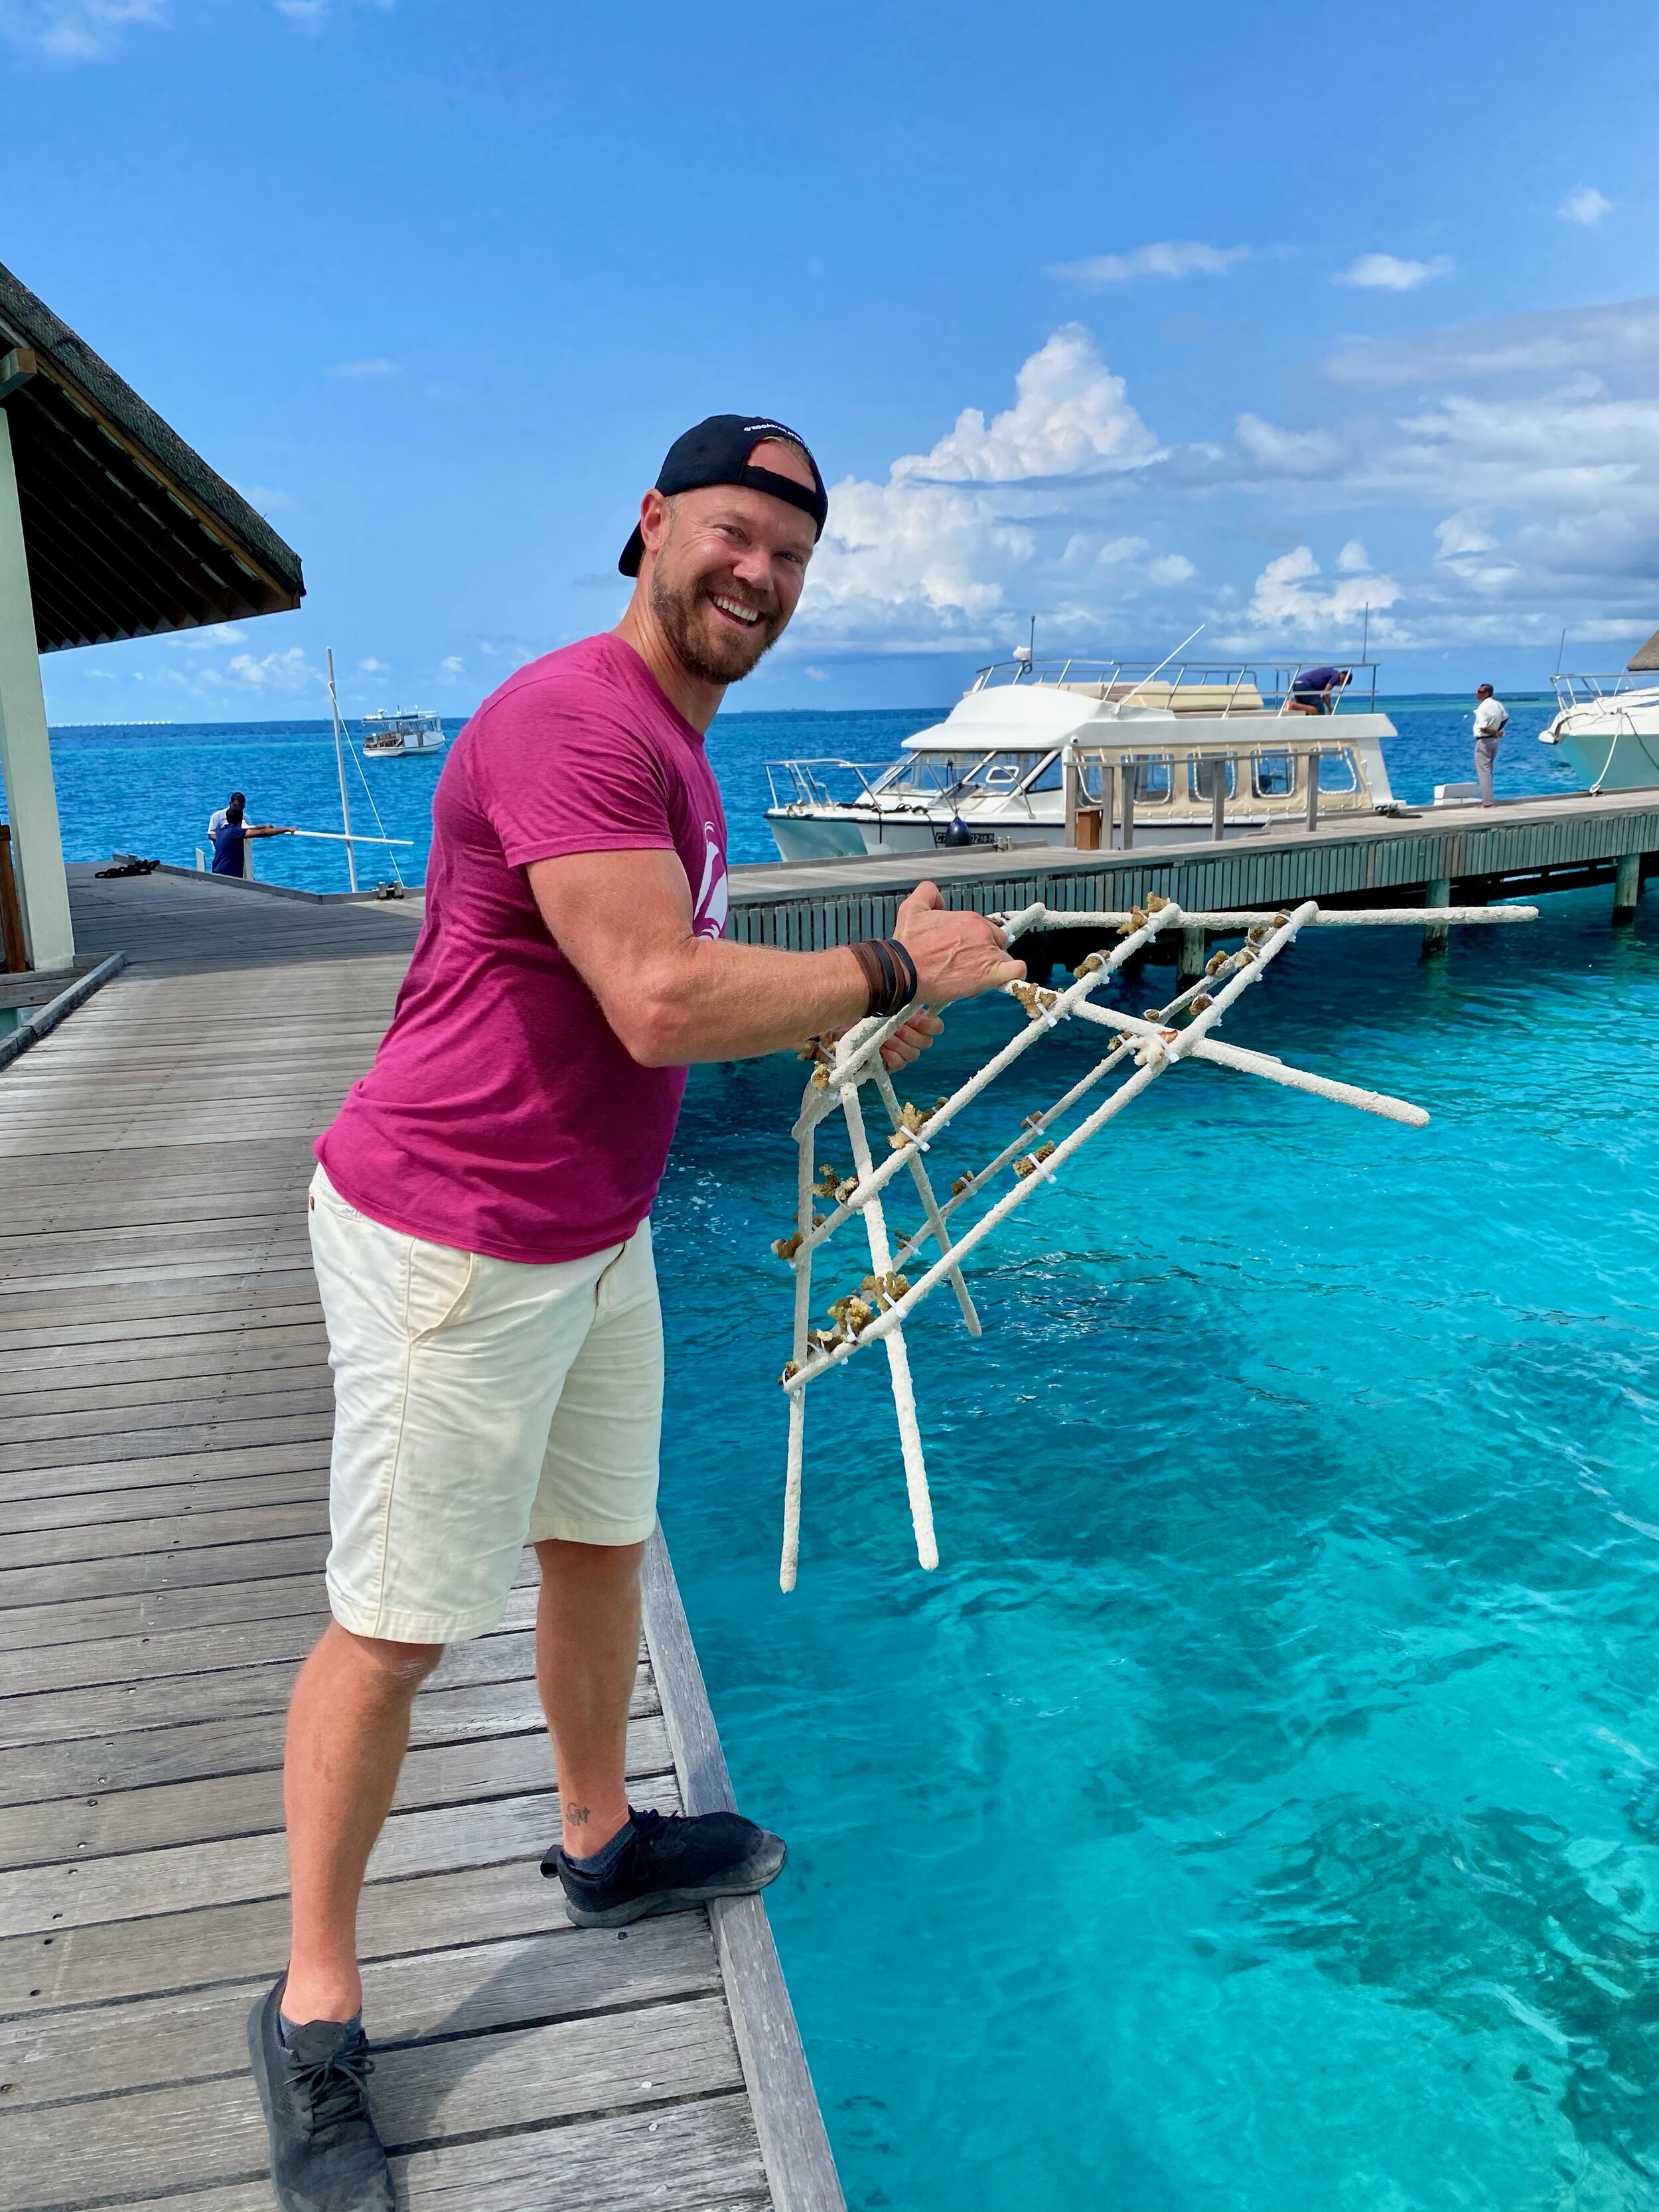 Zoom Vacations Co-Founder, Bryan Herb gets ready to drop the Zoom Vacations coral reef frame into the ocean.